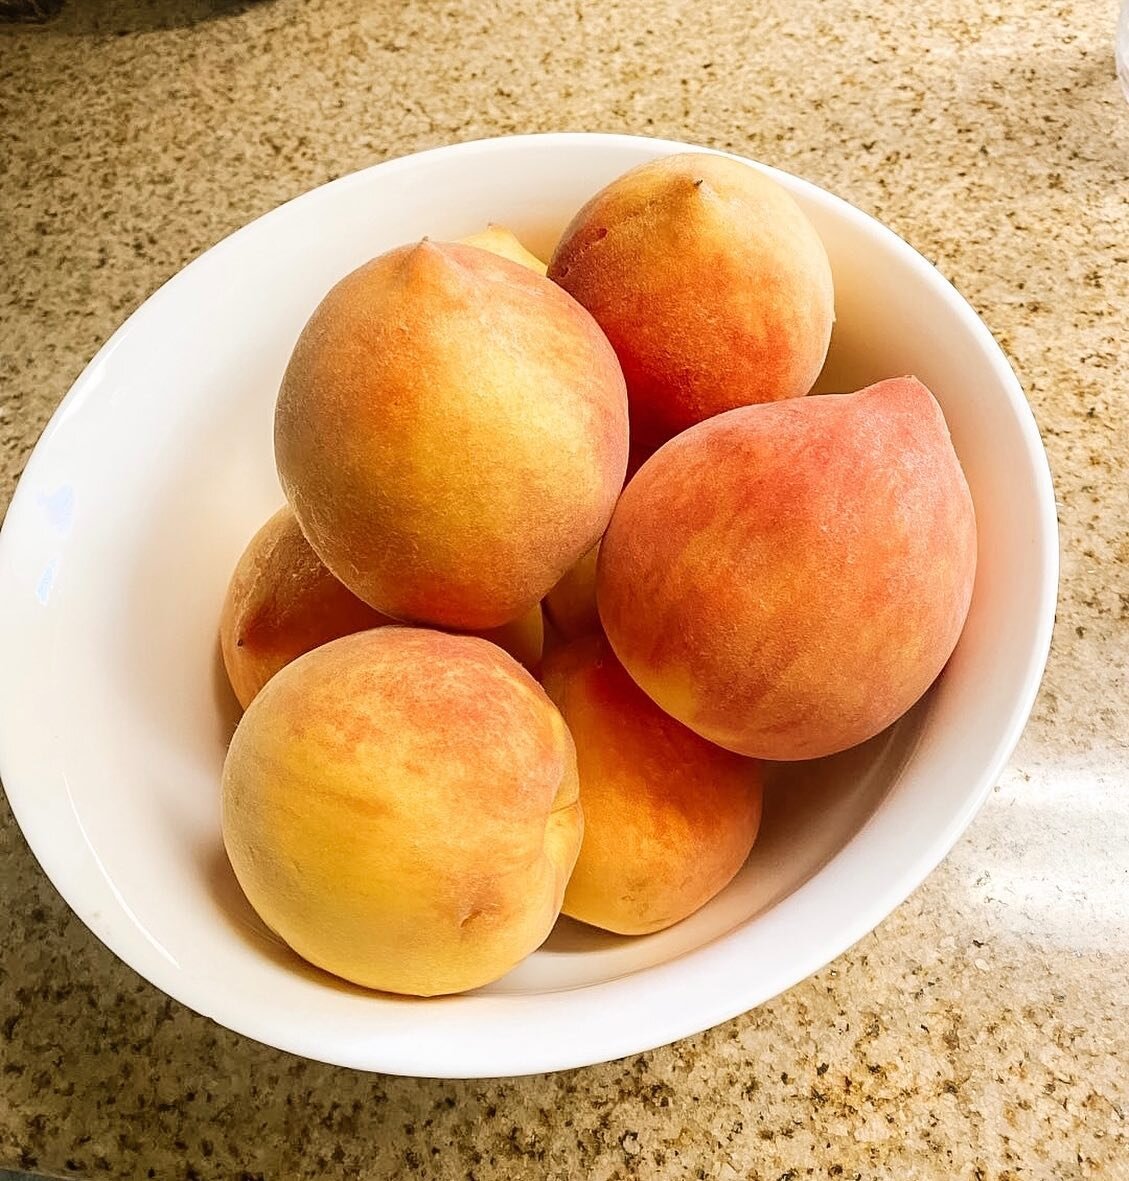 Sharing these beautiful peaches from @ggmapinky &lsquo;s harvest! We&rsquo;re so grateful for all the gifts of the earth.

What are you harvesting right now? 👇🏻👩🏻&zwj;🌾

#ShineYourLight #EarthOutdoors #GardenLove #Peaches #HomeGrown #LoveTheEart